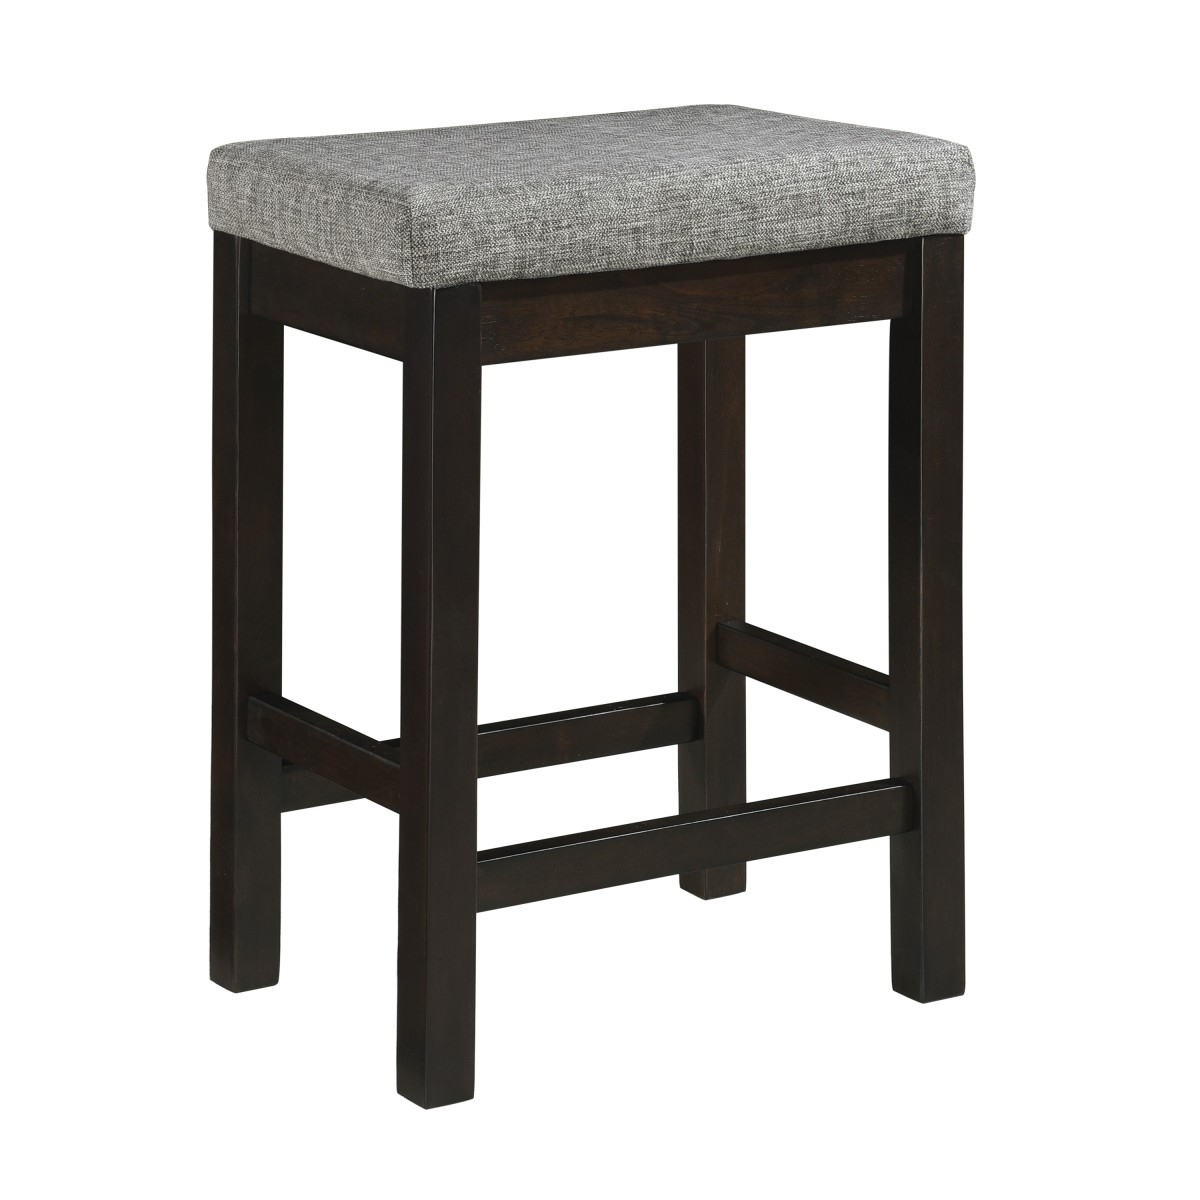 1 Drawer Counter Height Table With Backless Stools,Set Of 4,Brown And Gray- Saltoro Sherpi